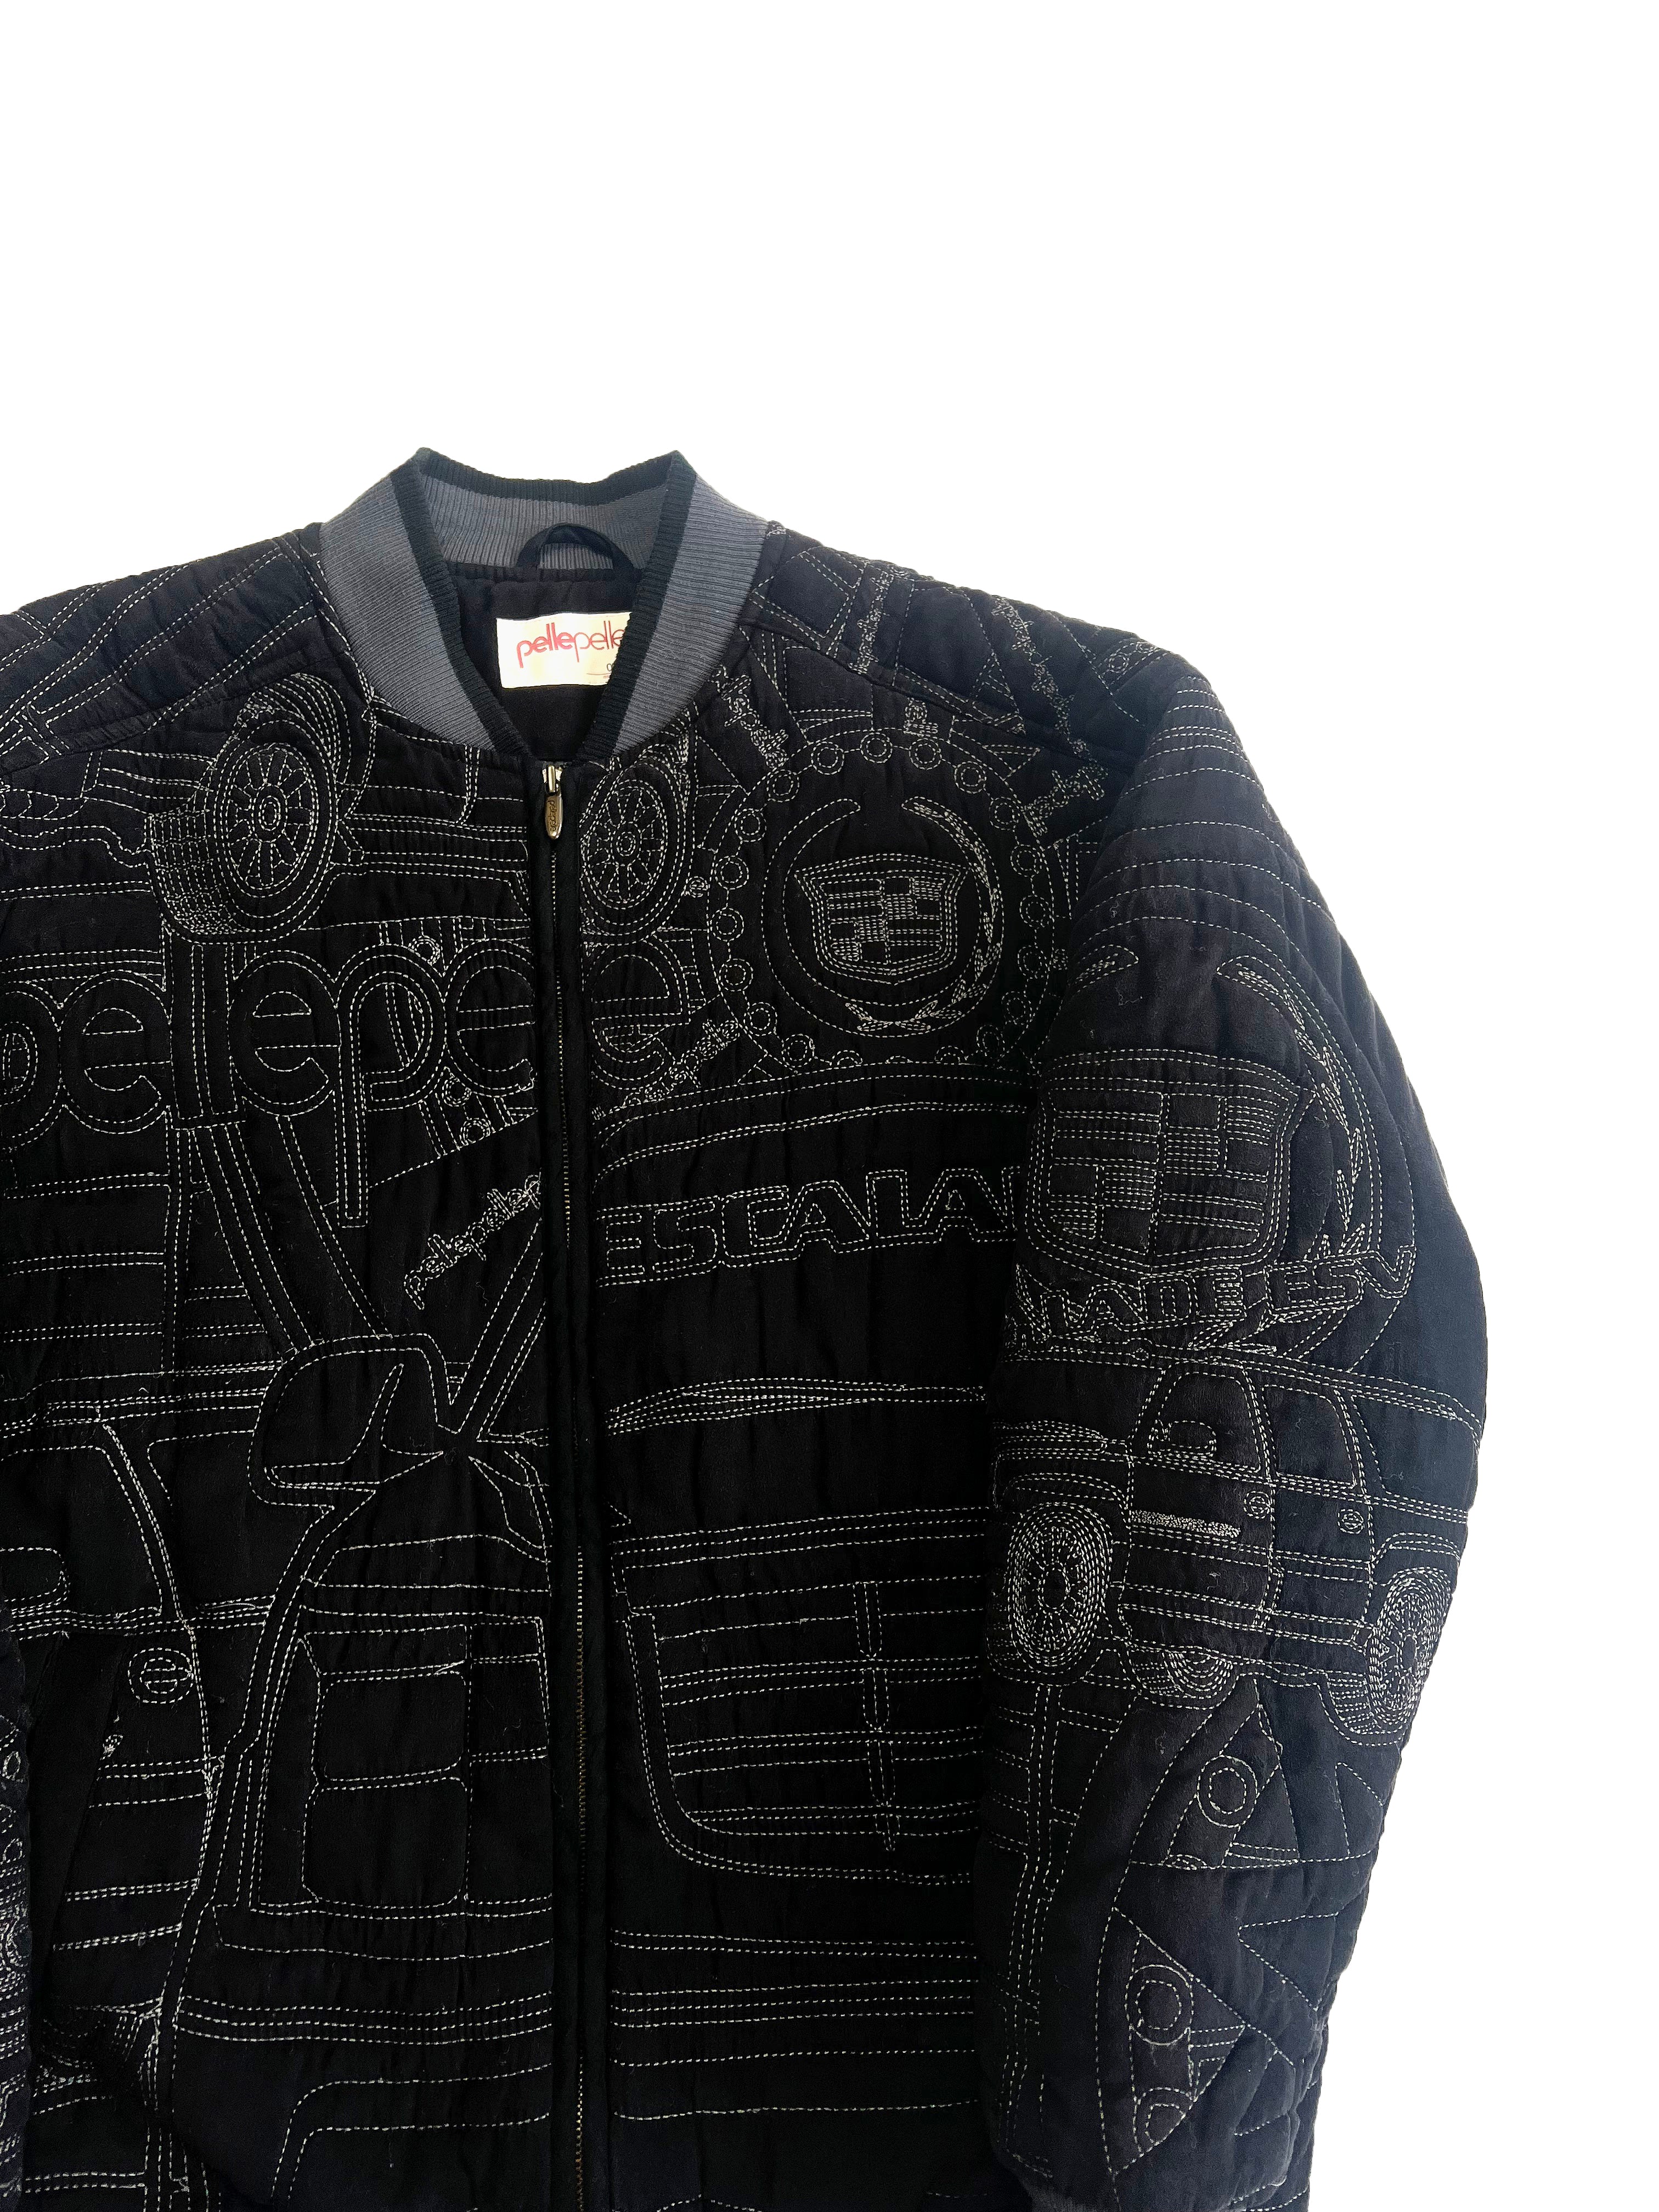 Pelle Pelle 'Escalade' Embroidered Bomber Jacket 00's